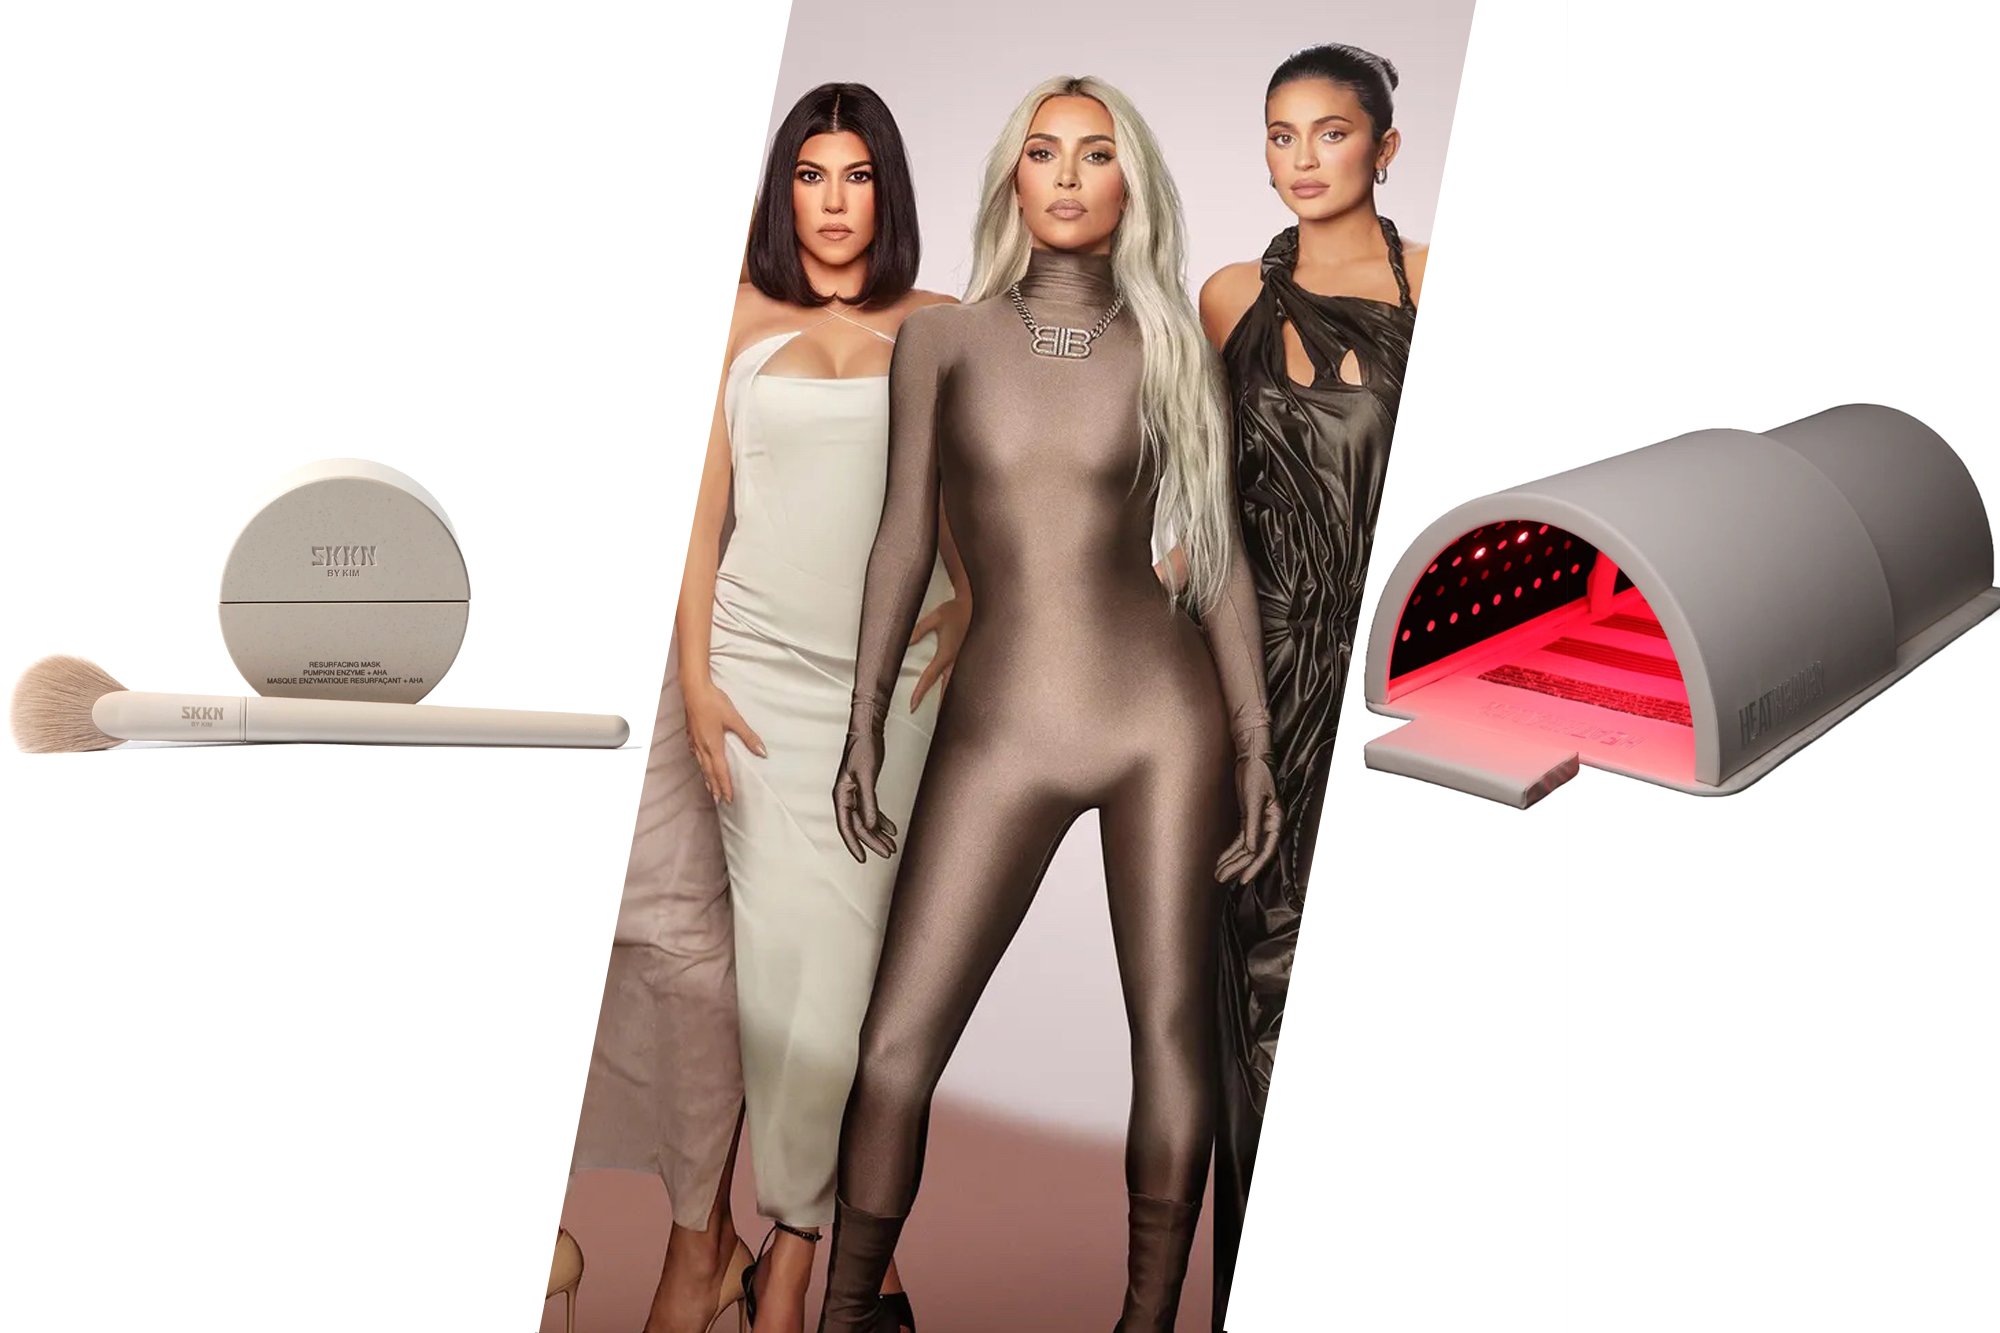 The Kardashians’ Holiday Gift Guide is Pricey. Here Are Some Cheaper Alternatives